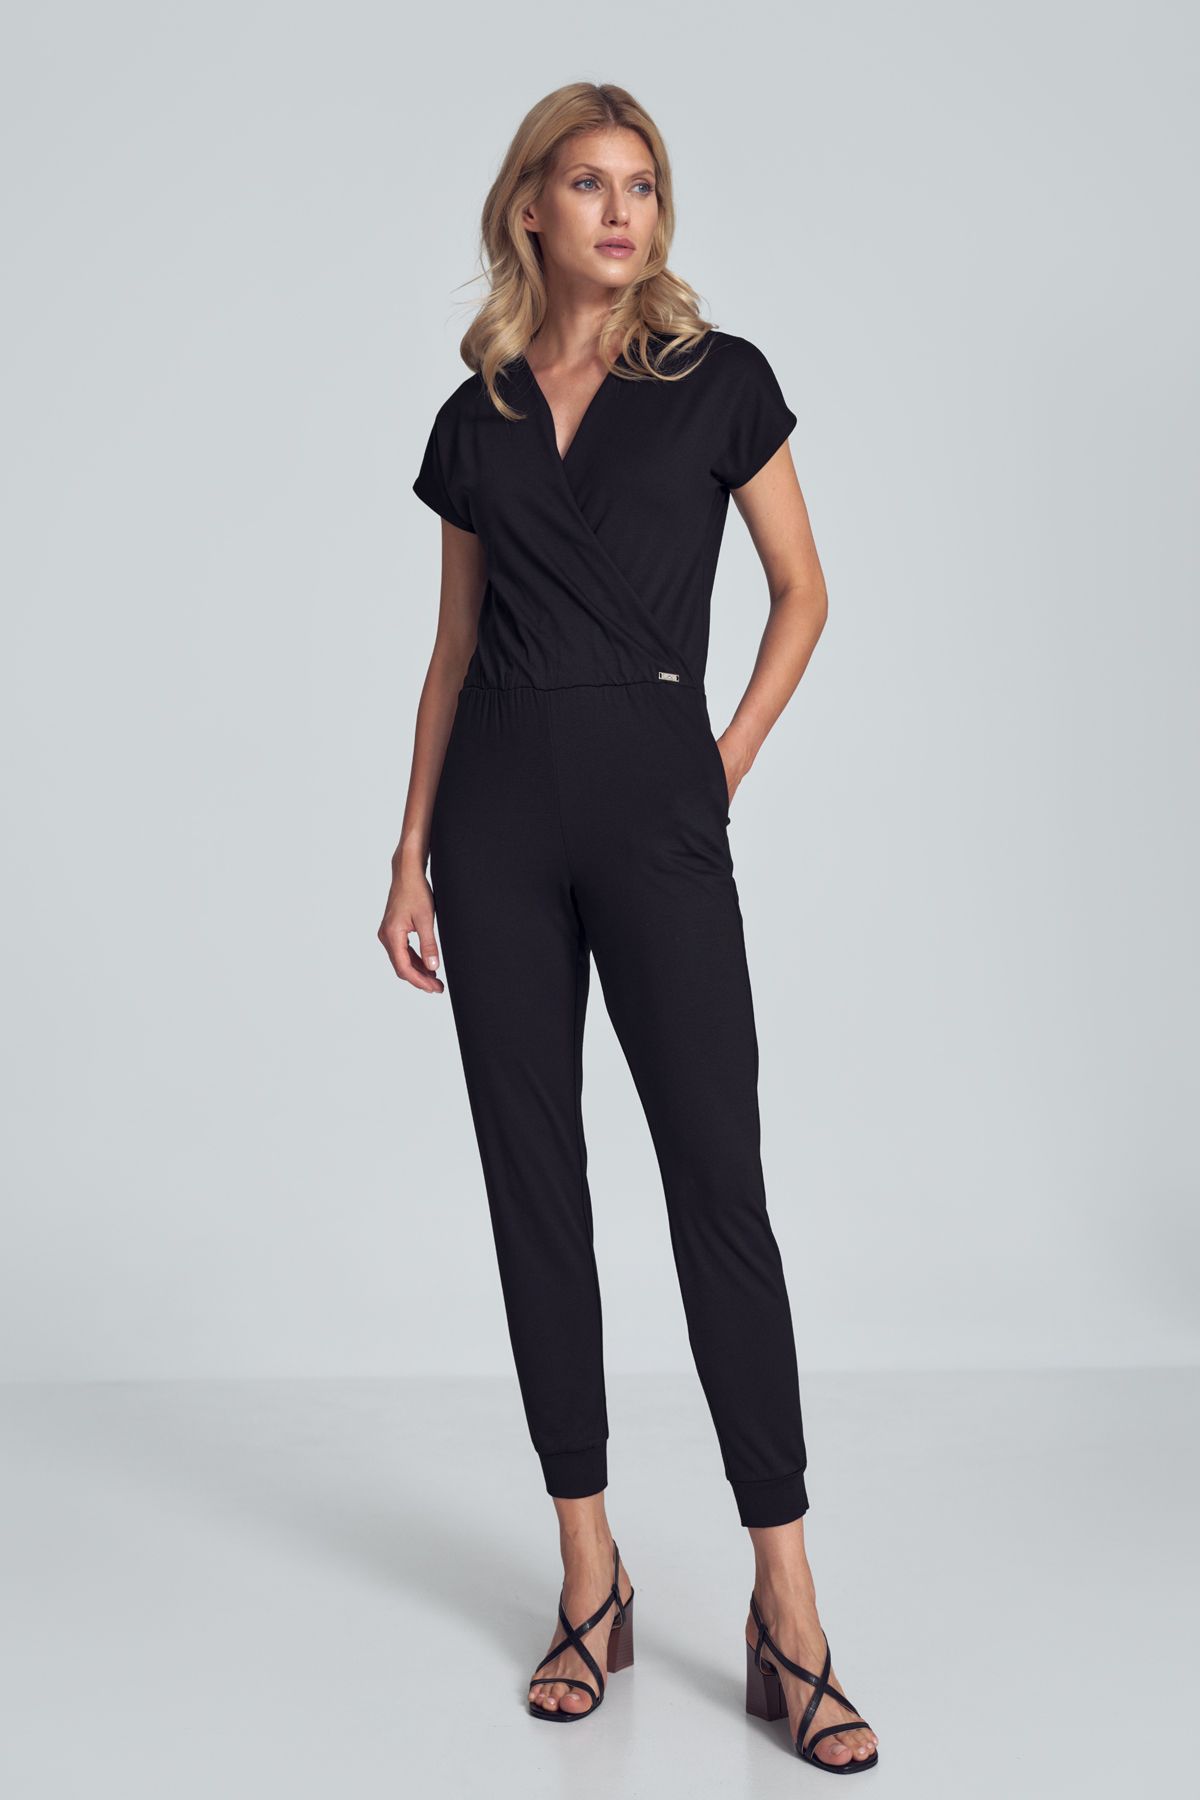 Black jumpsuit with a sporty cut, wrinkled neckline, an elastic band sewn at the waist, narrow legs finished with a welt. Pockets in the side seams.